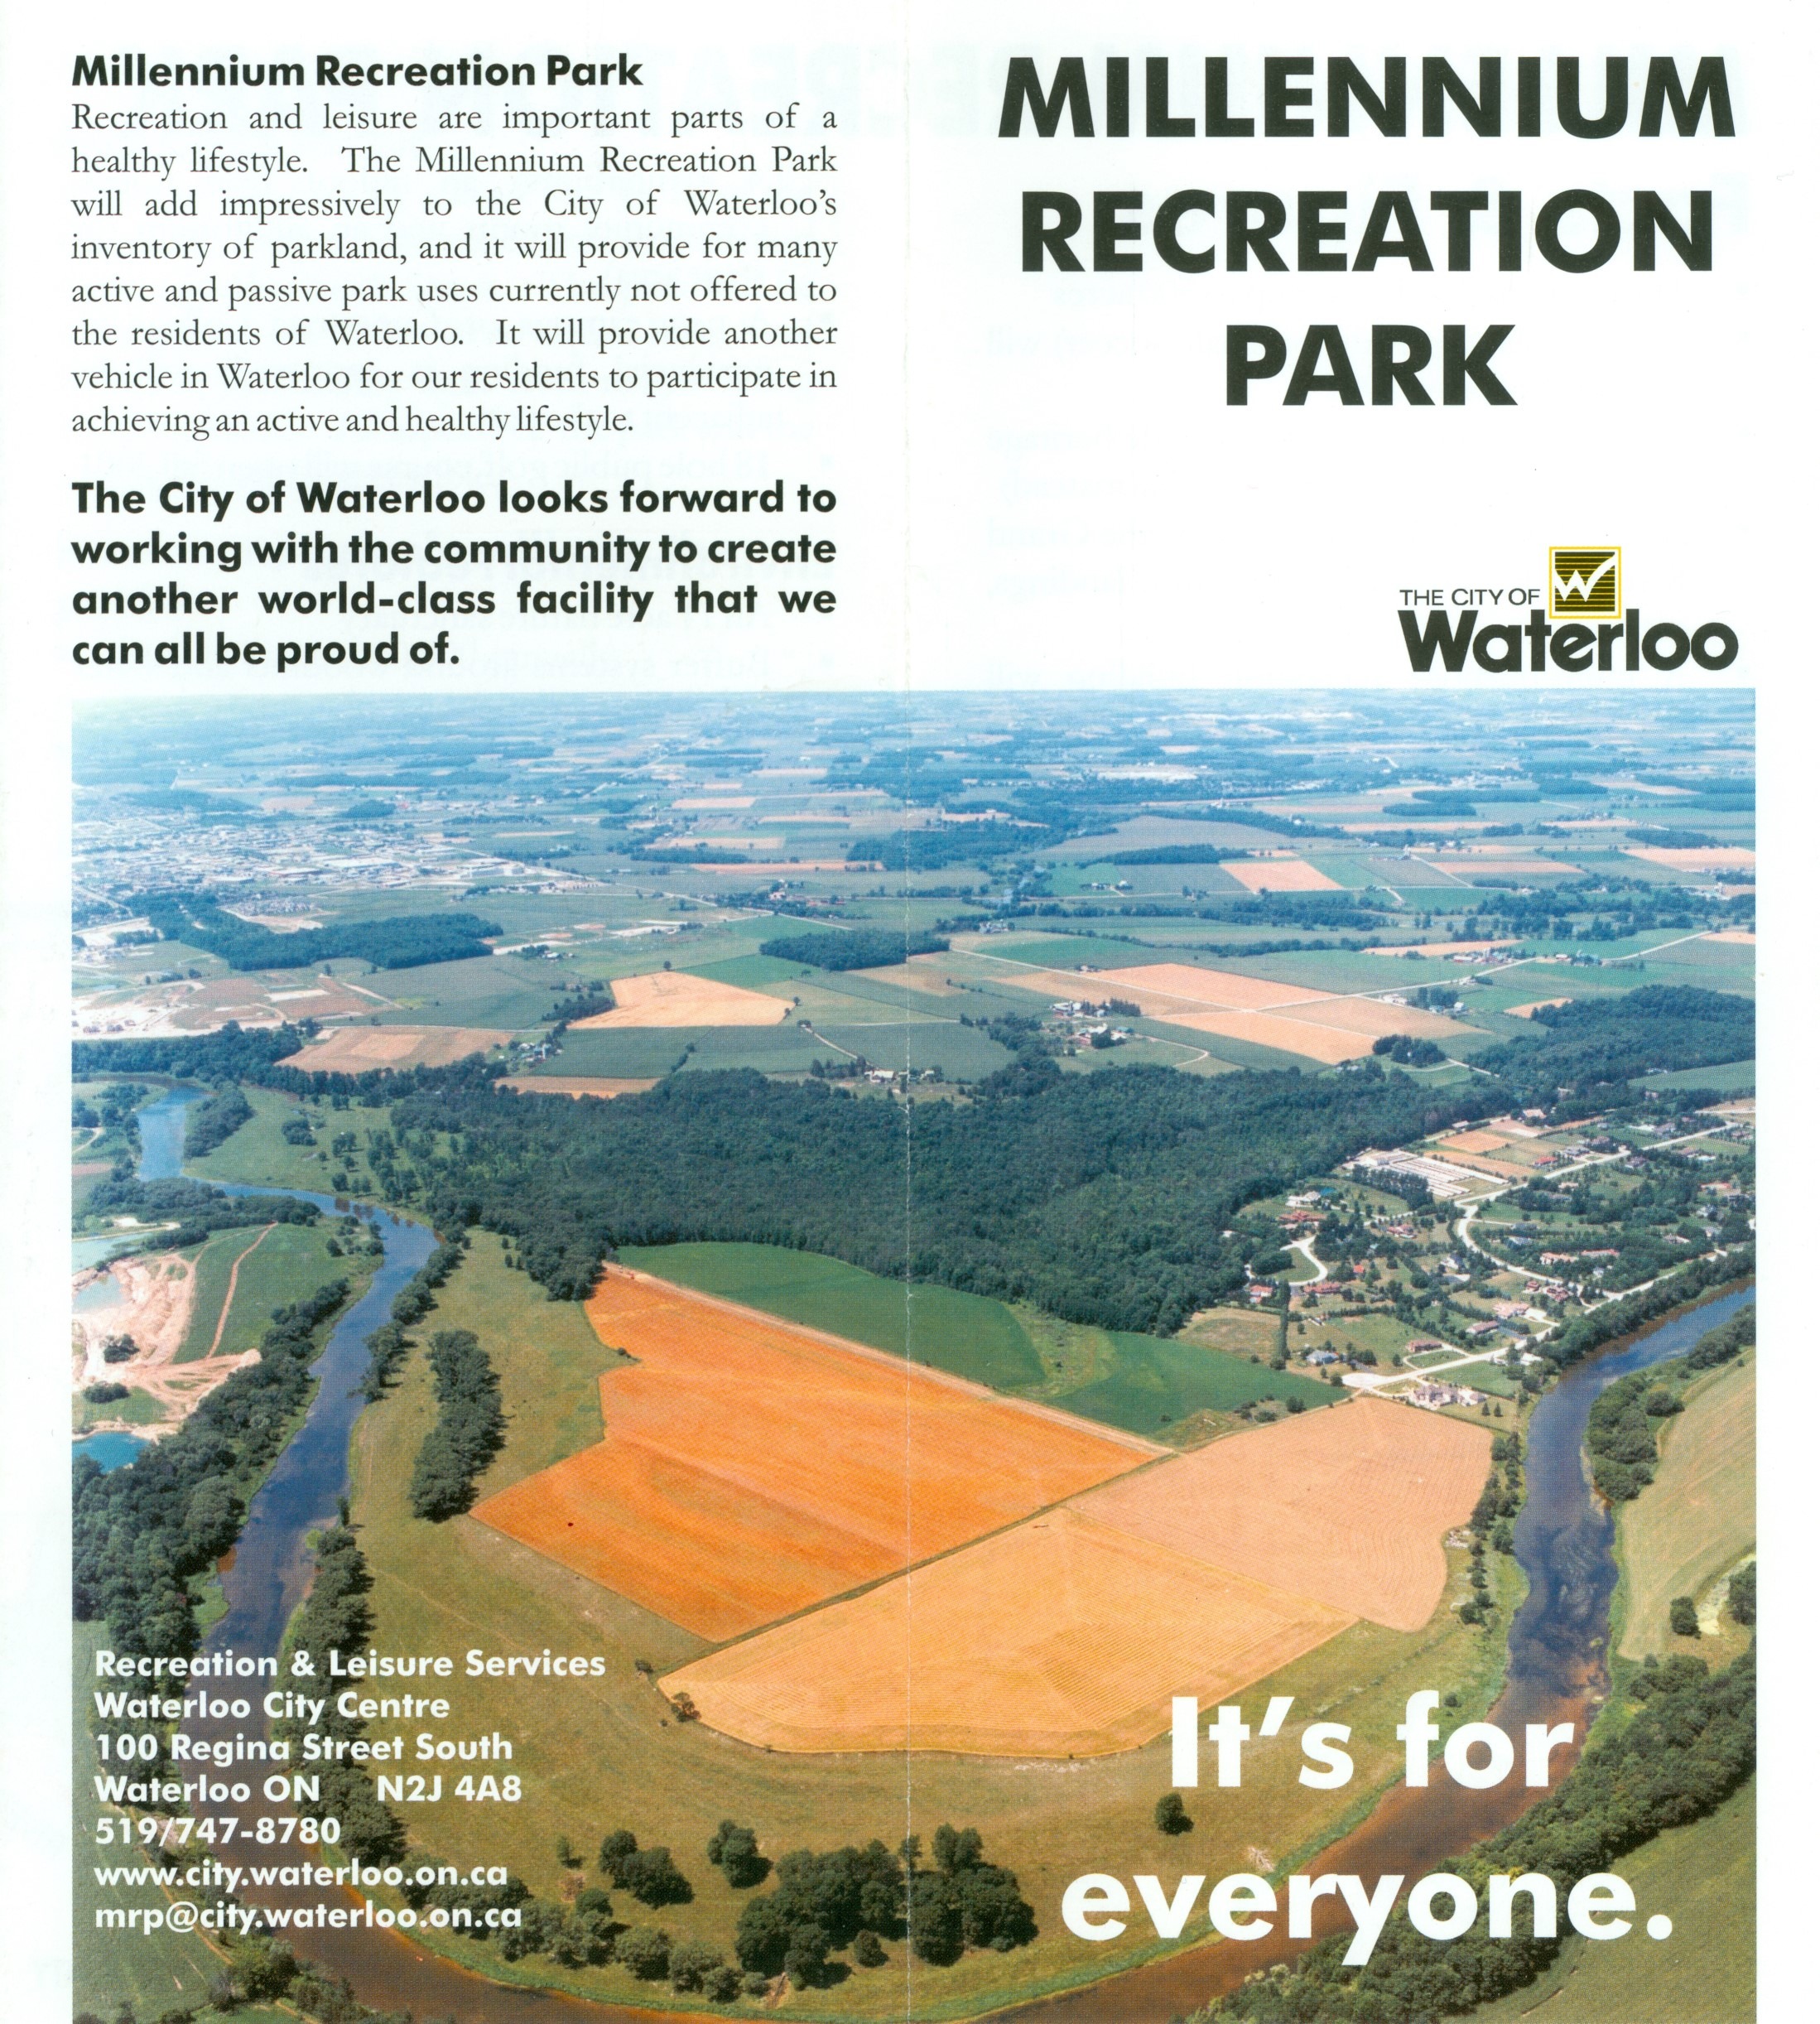 City of Waterloo ad for Millennium Recreation Park construction